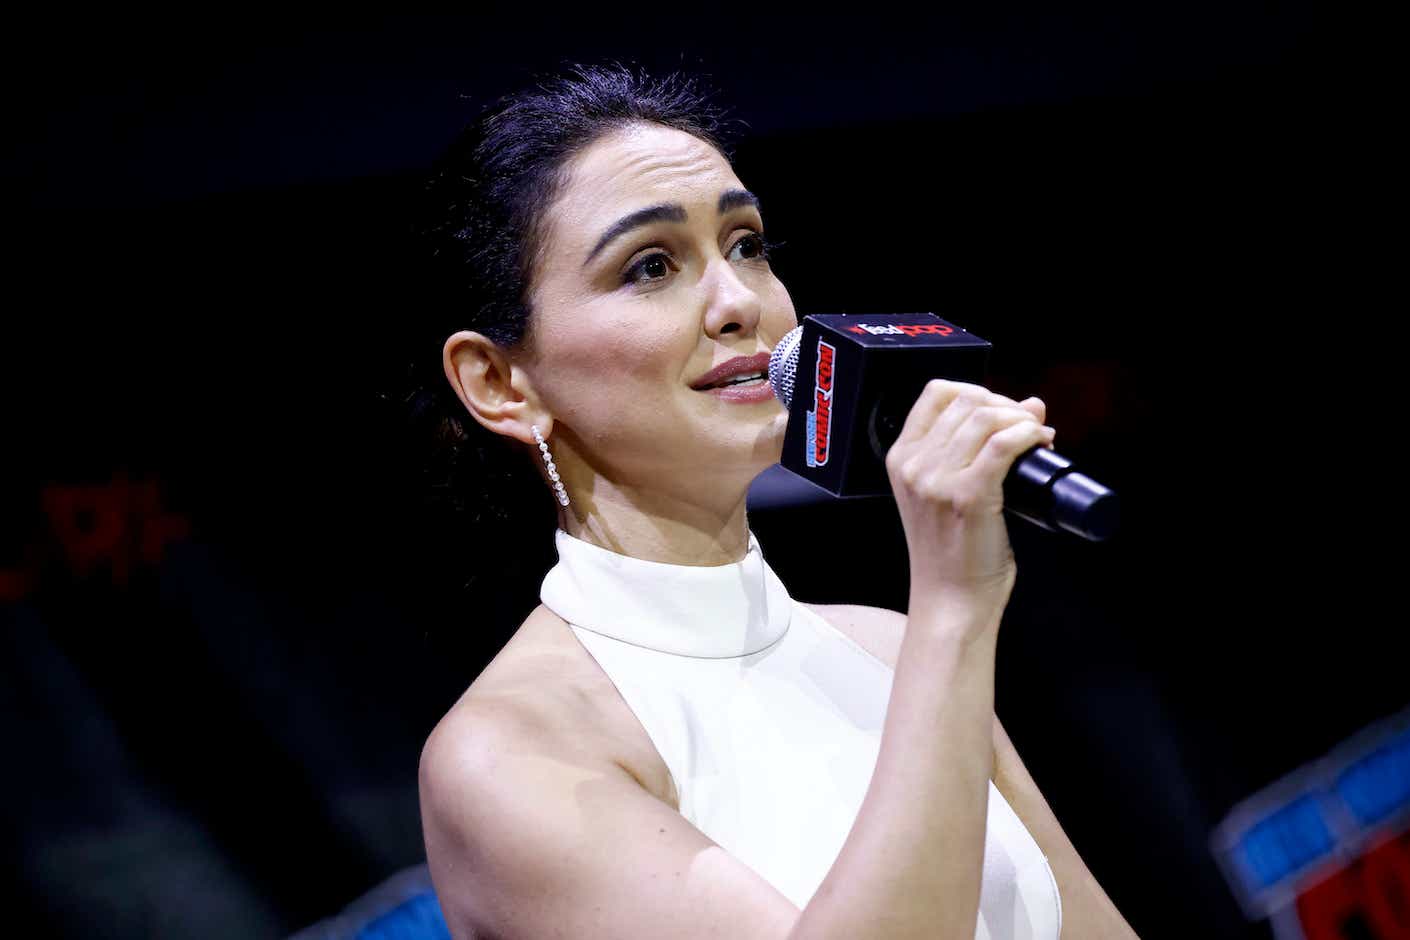 Nazanin Boniadi speaks solemnly into a microphone while onstage.